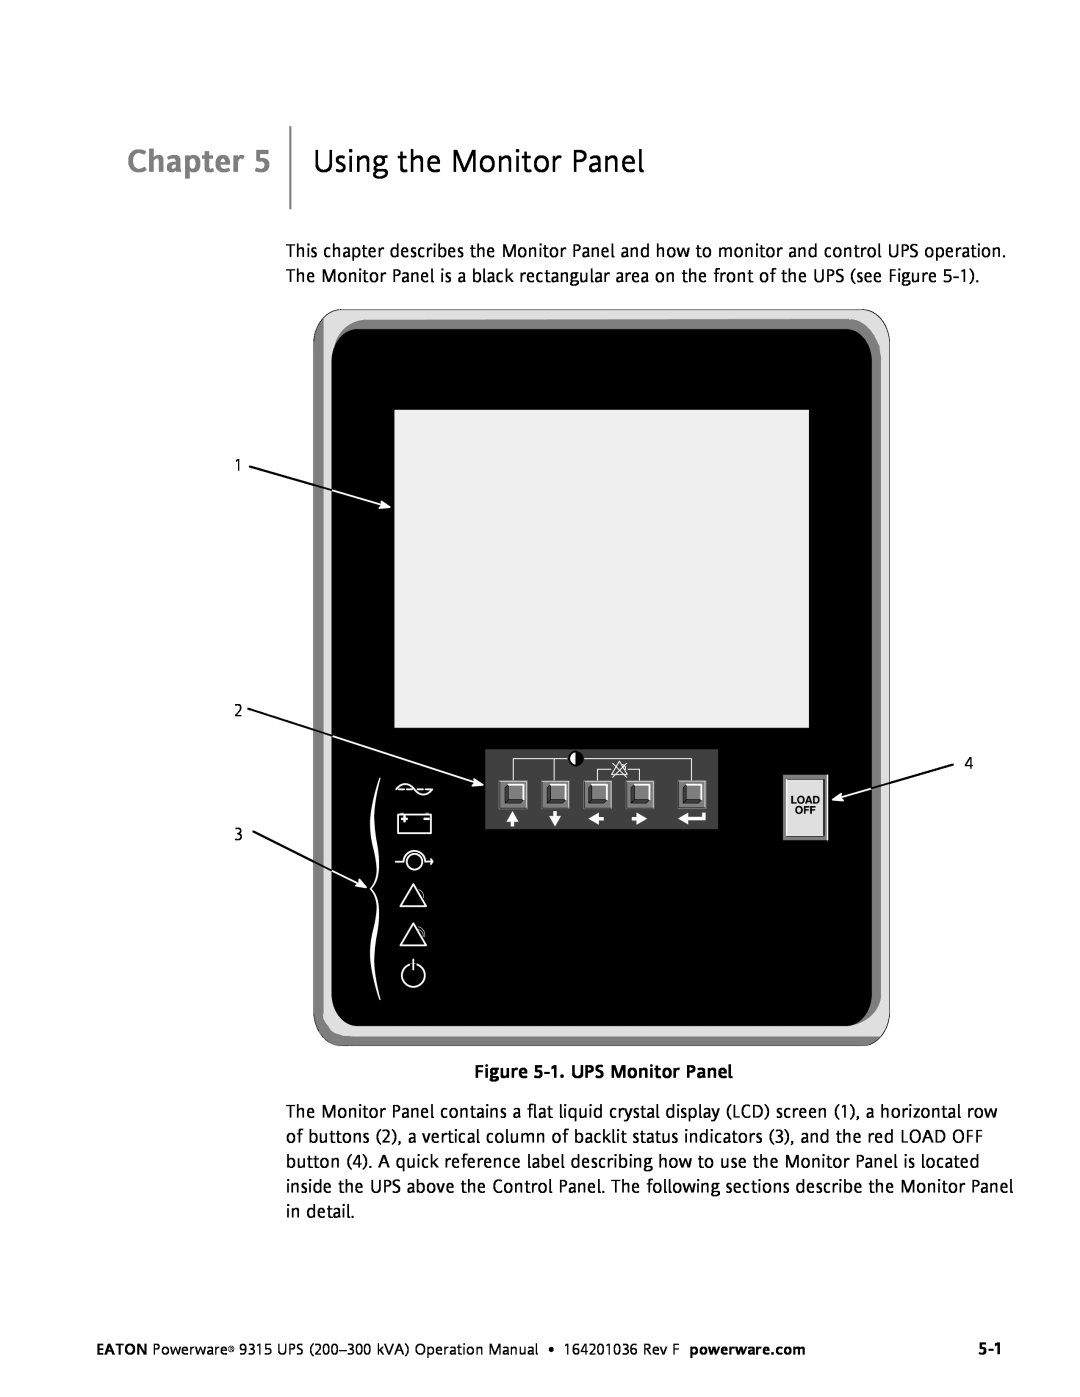 Eaton Electrical Powerware 9315 operation manual Using the Monitor Panel, Chapter, 1. UPS Monitor Panel 